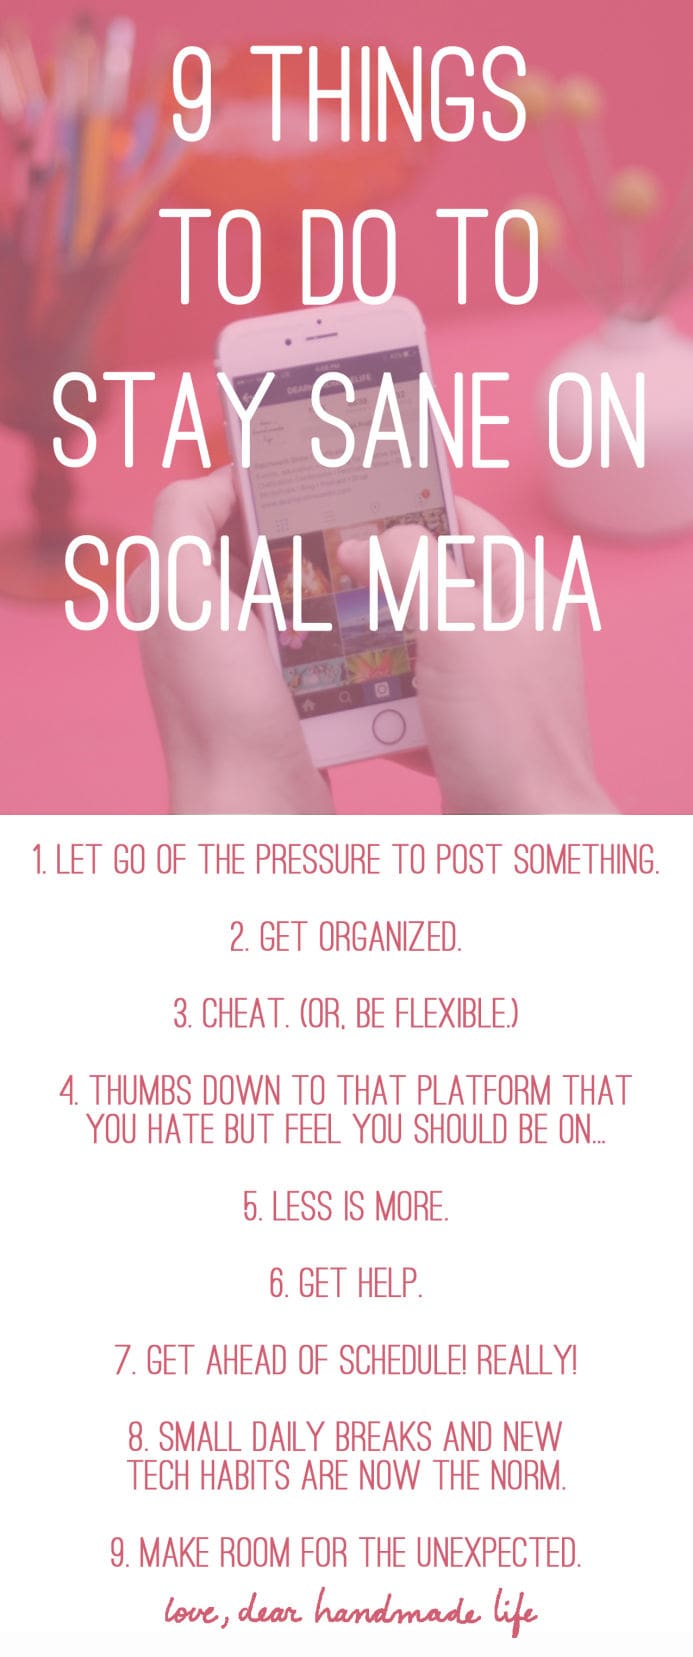 9 things to do to stay sane social media from Dear Handmade Life